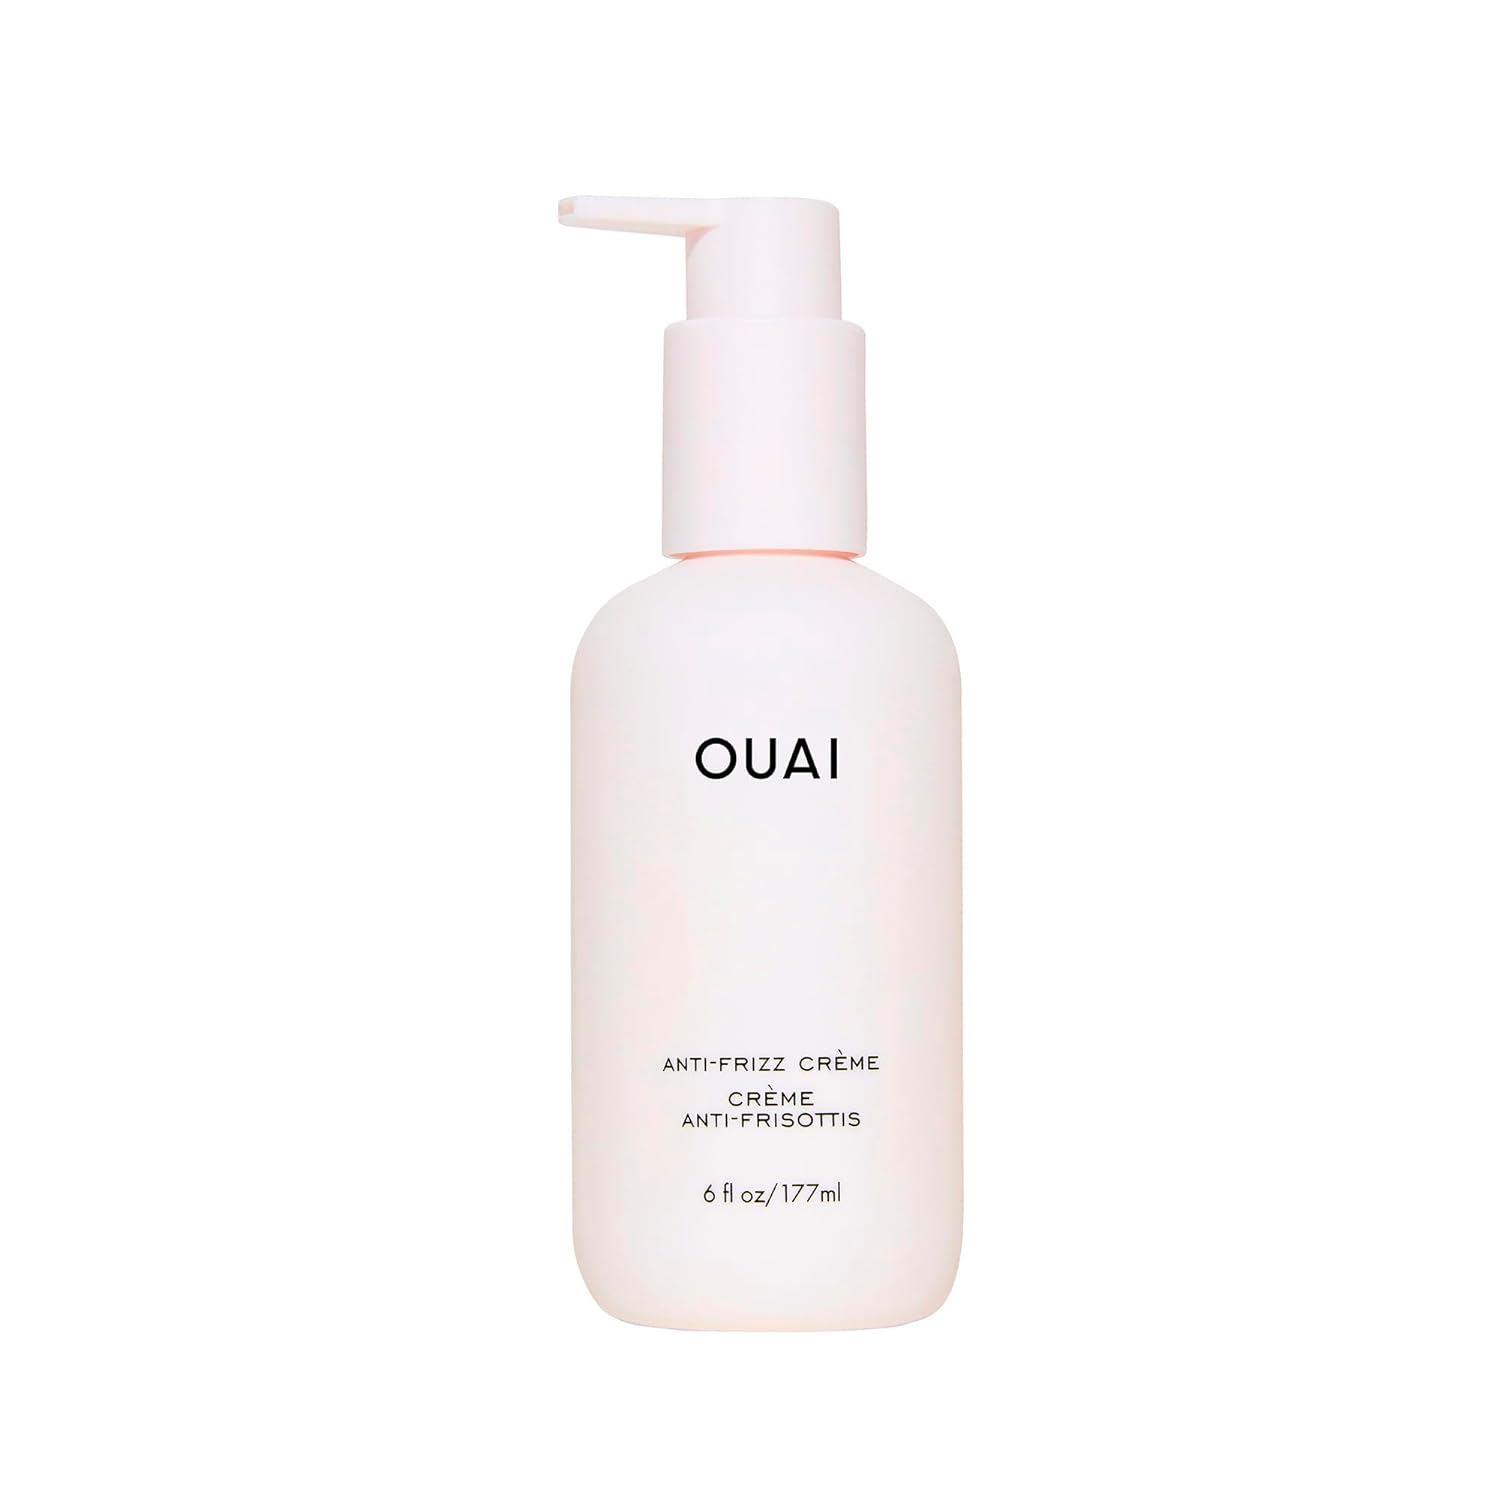 OUAI Anti Frizz Cream - Moisturizing Hair Cream with Frizz Control & Heat Protection - Provides Lasting Hydration with Jackfruit & Beetroot Extract - Paraben, Phthalate & Sulfate Free (6 oz)